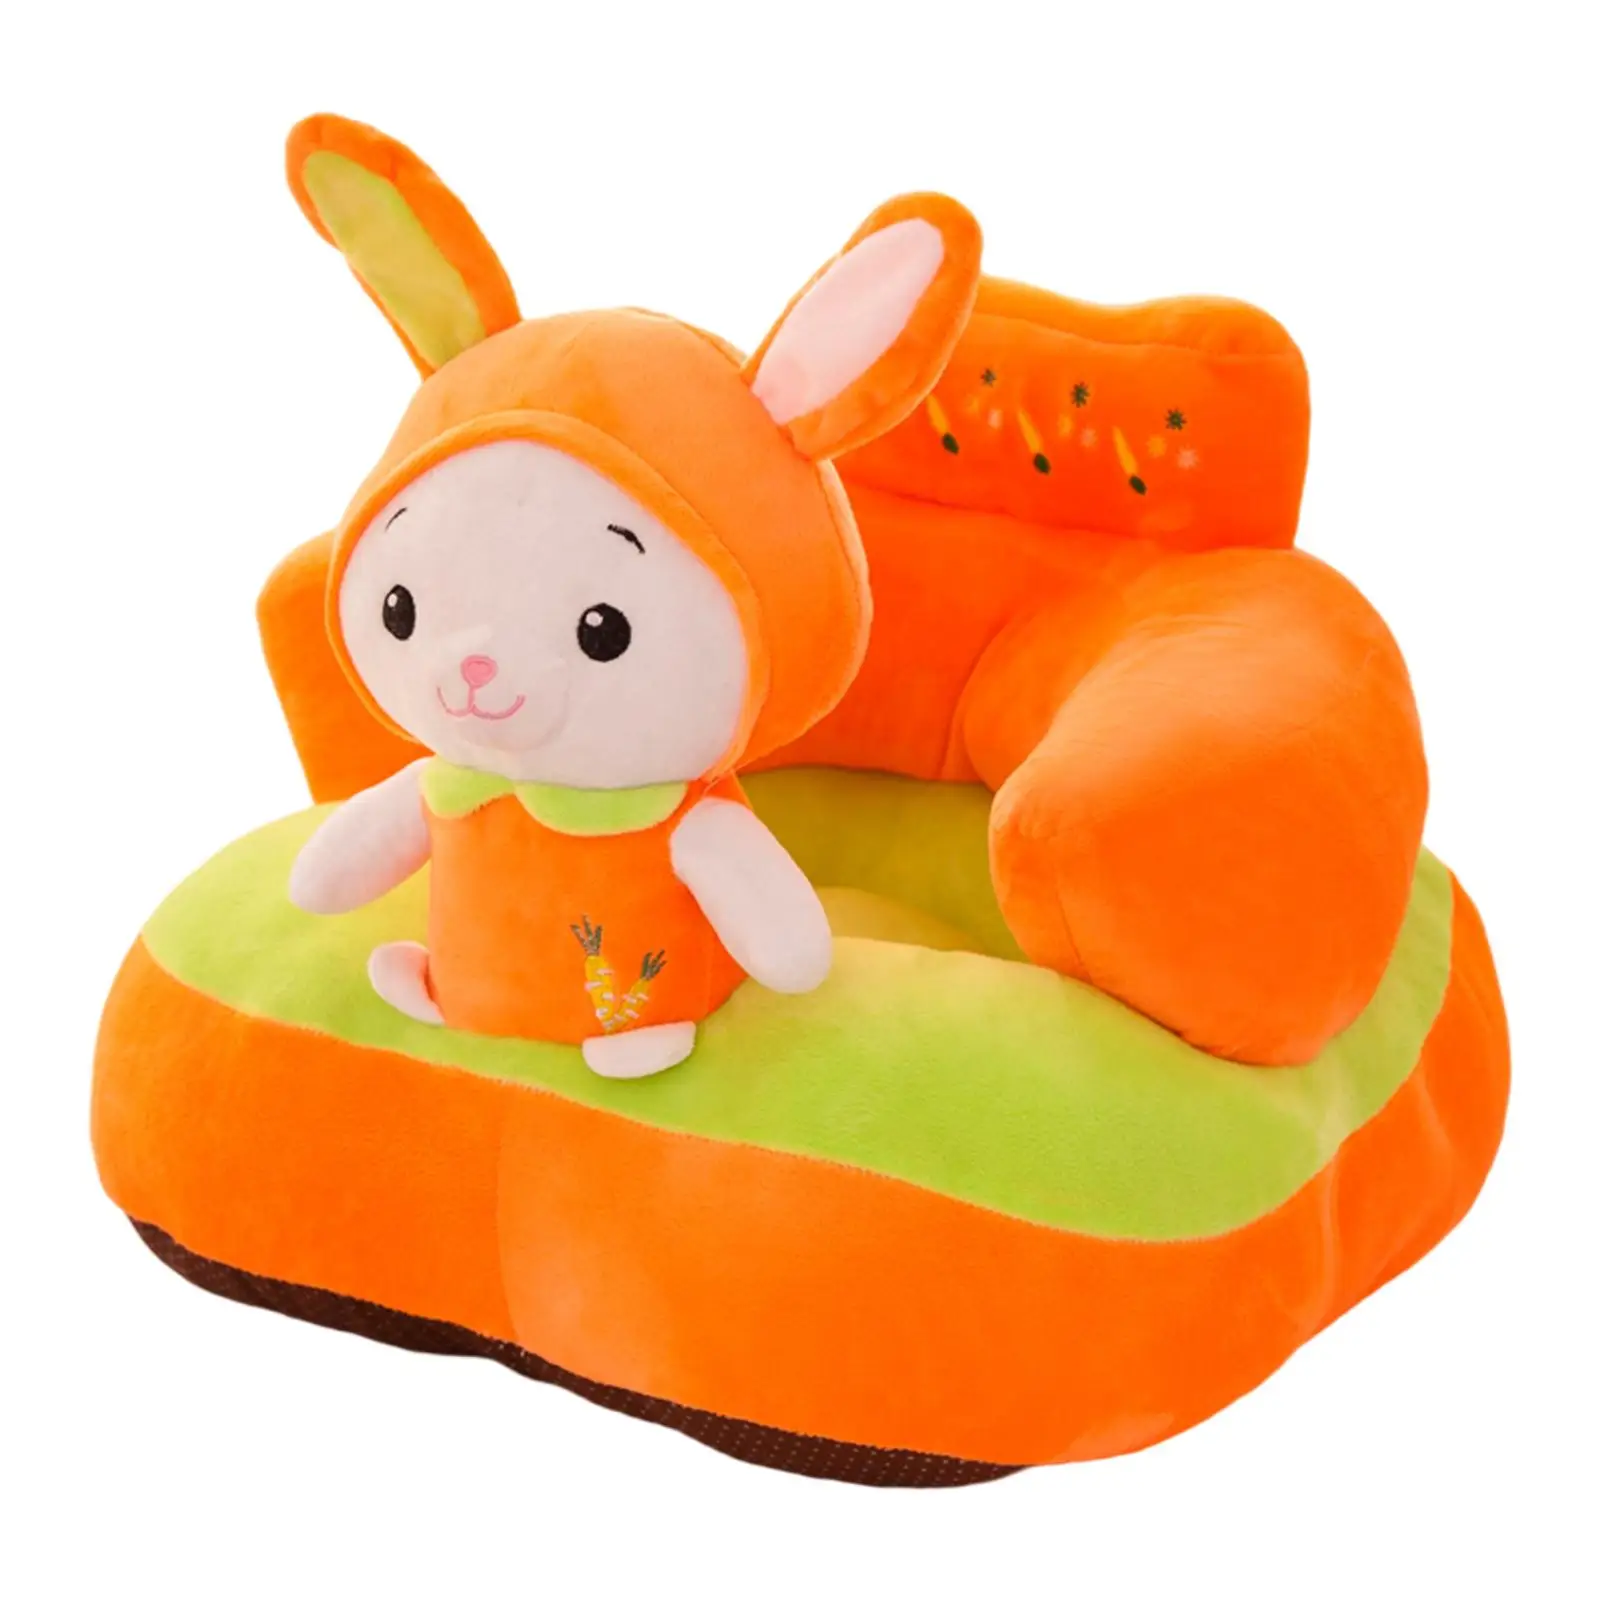 Cute Cartoon Baby Seat Sofa Cover Learning to Sit Baby Toy Animal Washable Couch Seat Cover No Filler Gifts Feeding Chair Case